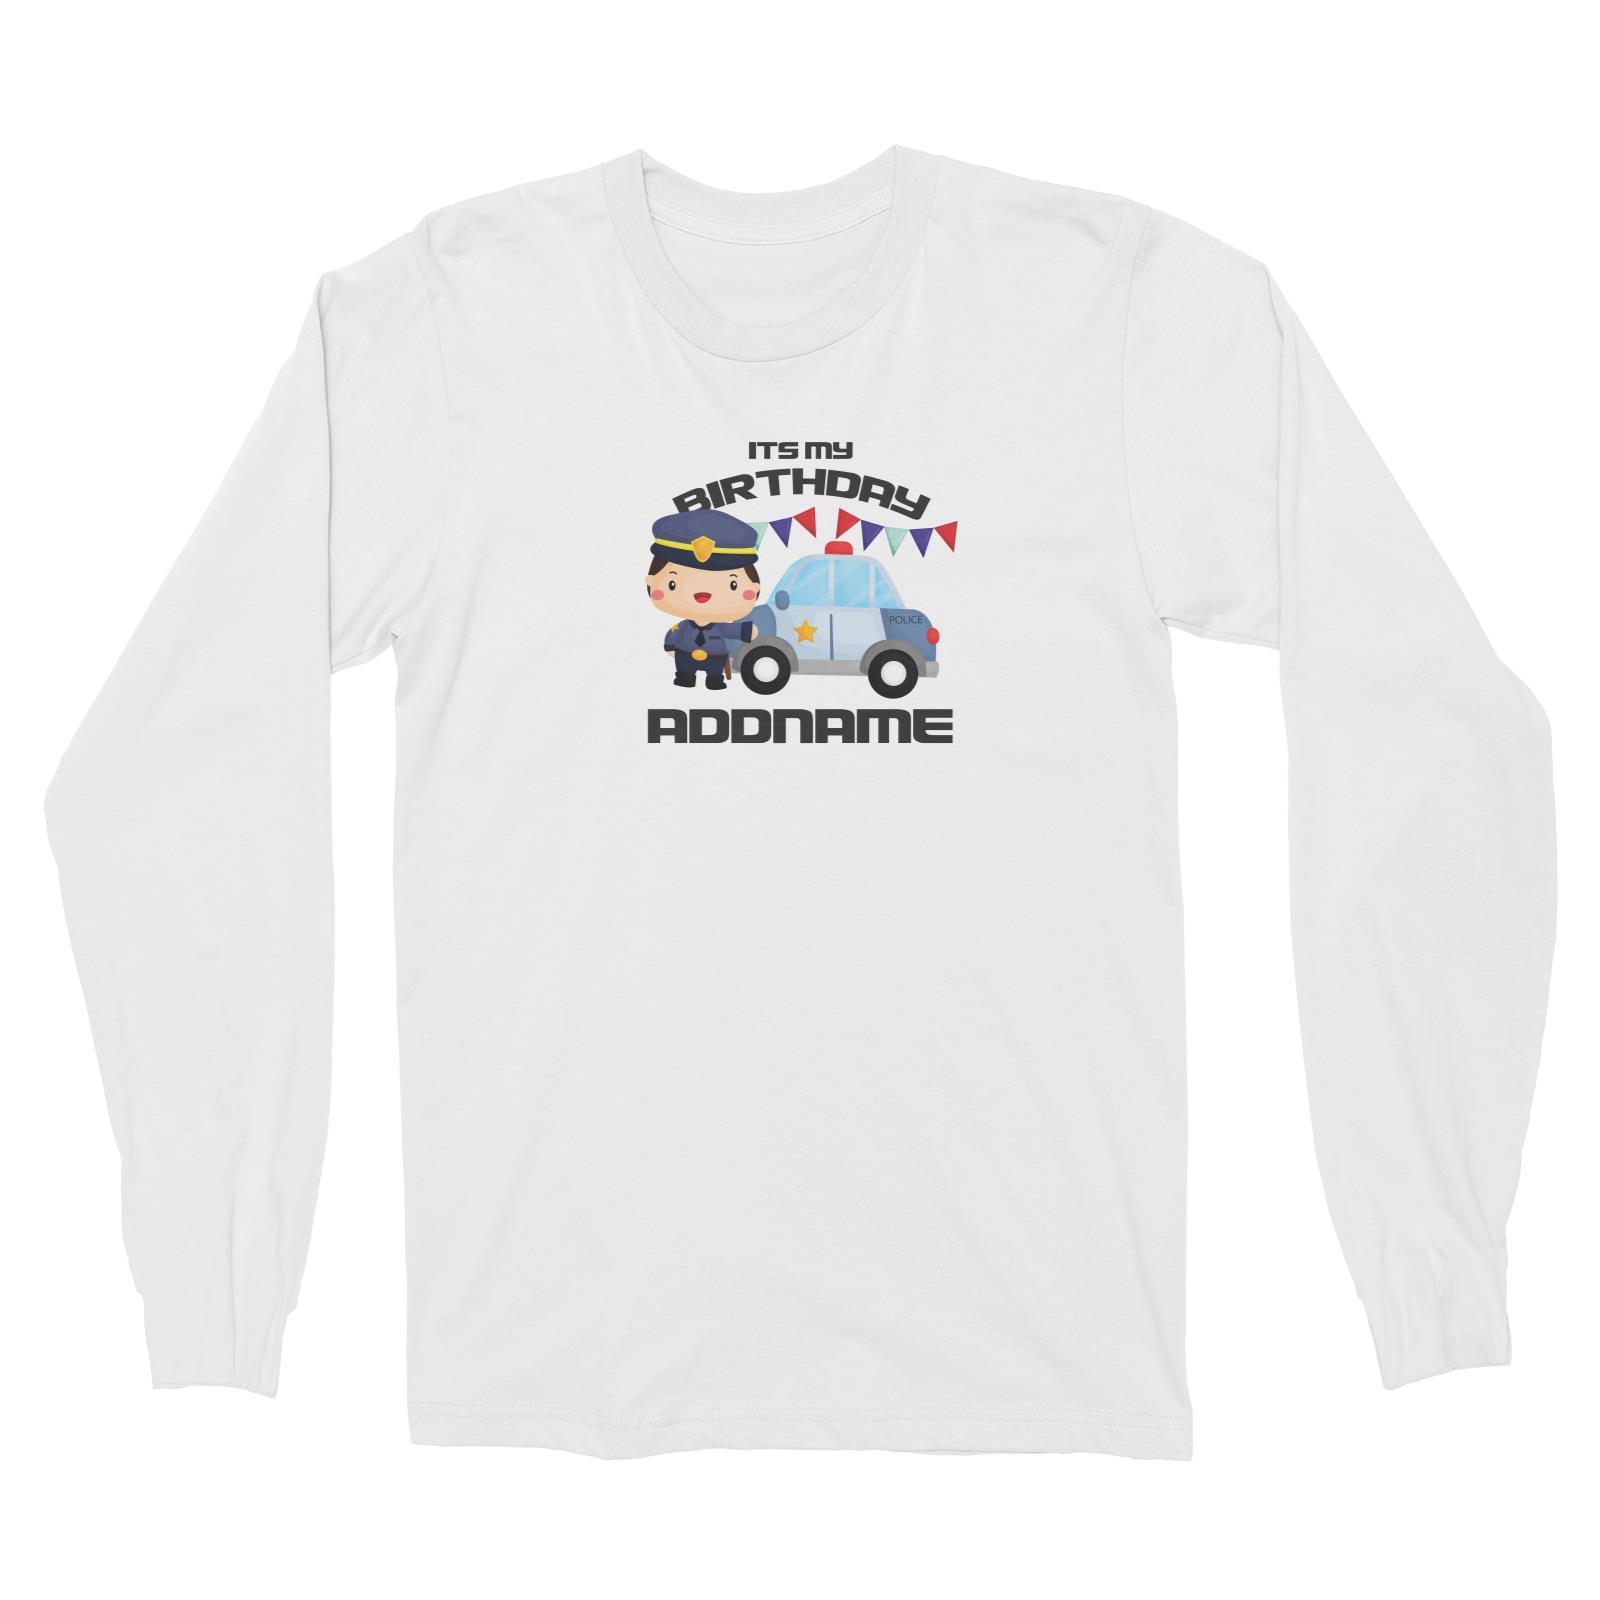 Birthday Police Officer Boy In Suit With Police Car Its My Birthday Addname Long Sleeve Unisex T-Shirt